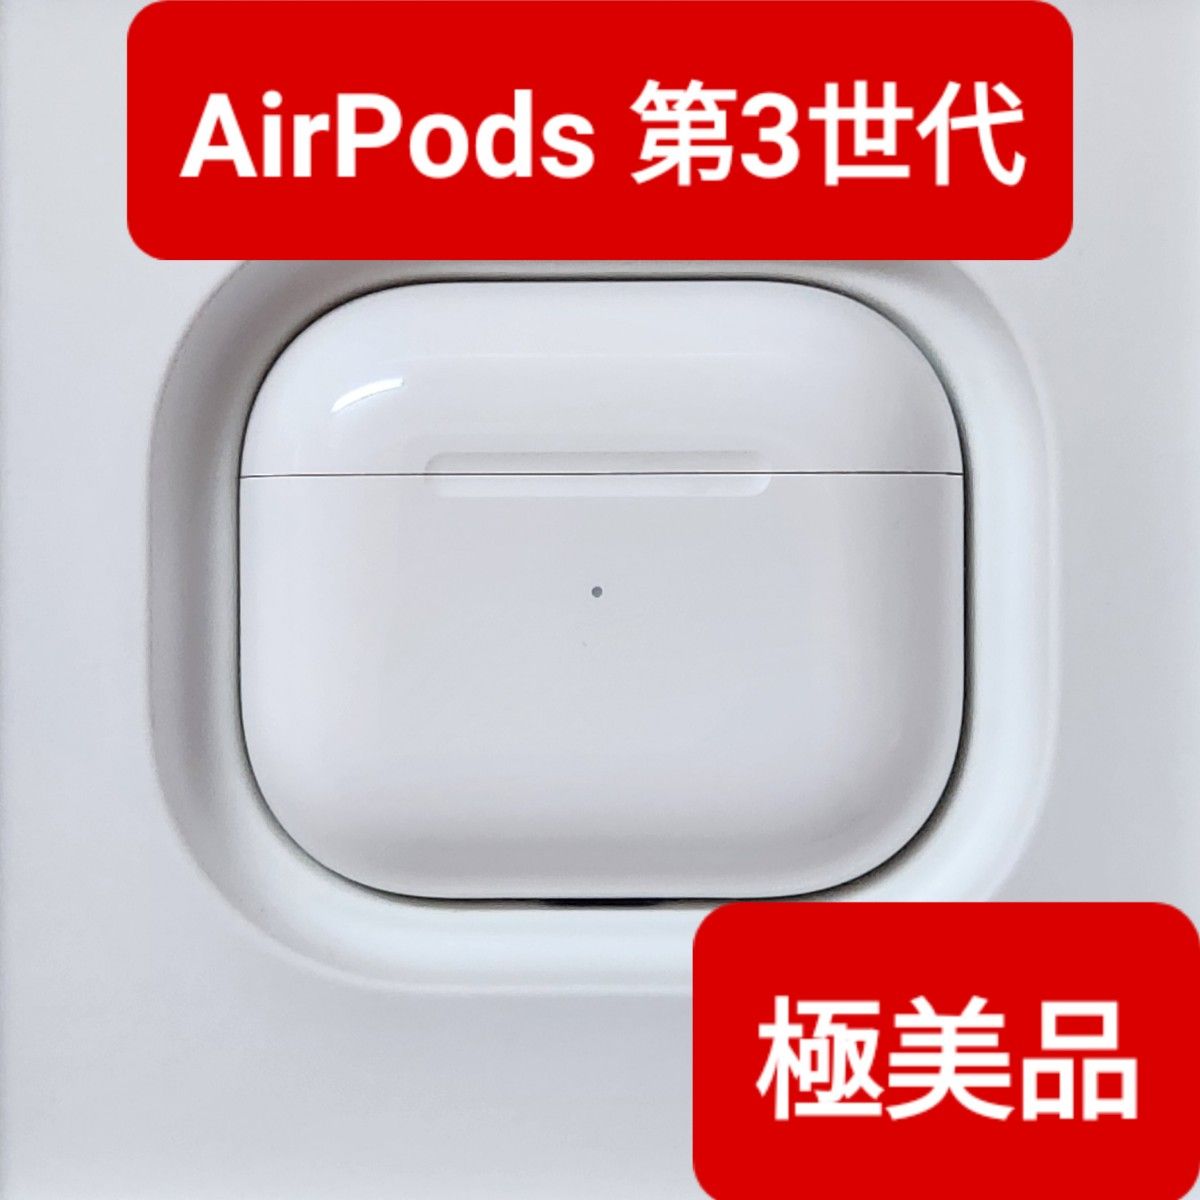 AirPods pro 極美品 箱あり｜PayPayフリマ